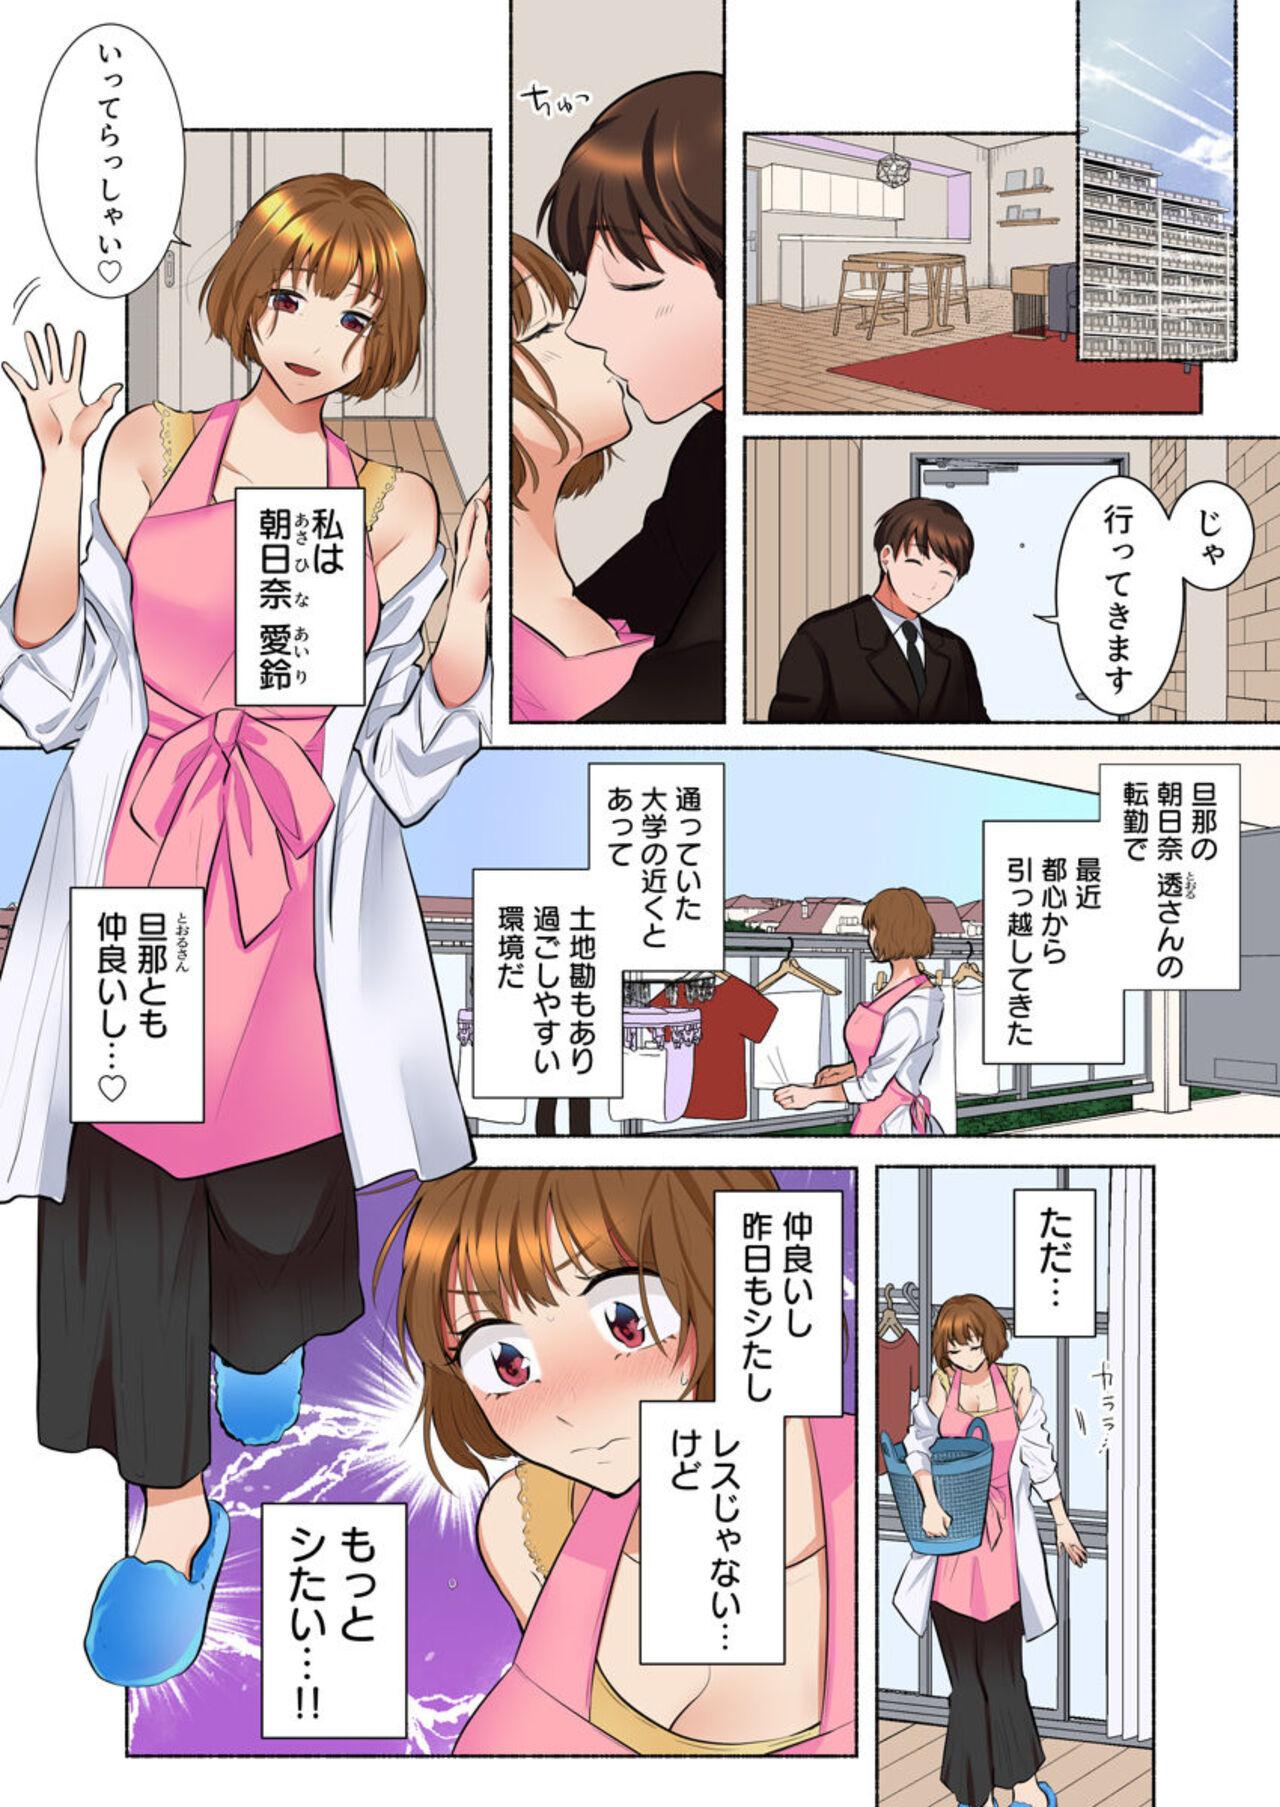 [Ika Hotaru] My Neighbor Is A Sadistic Ex-Boyfriend ~I Love My Husband, But My Aching Body Has Been Redeveloped~ (Full Color) 1 9